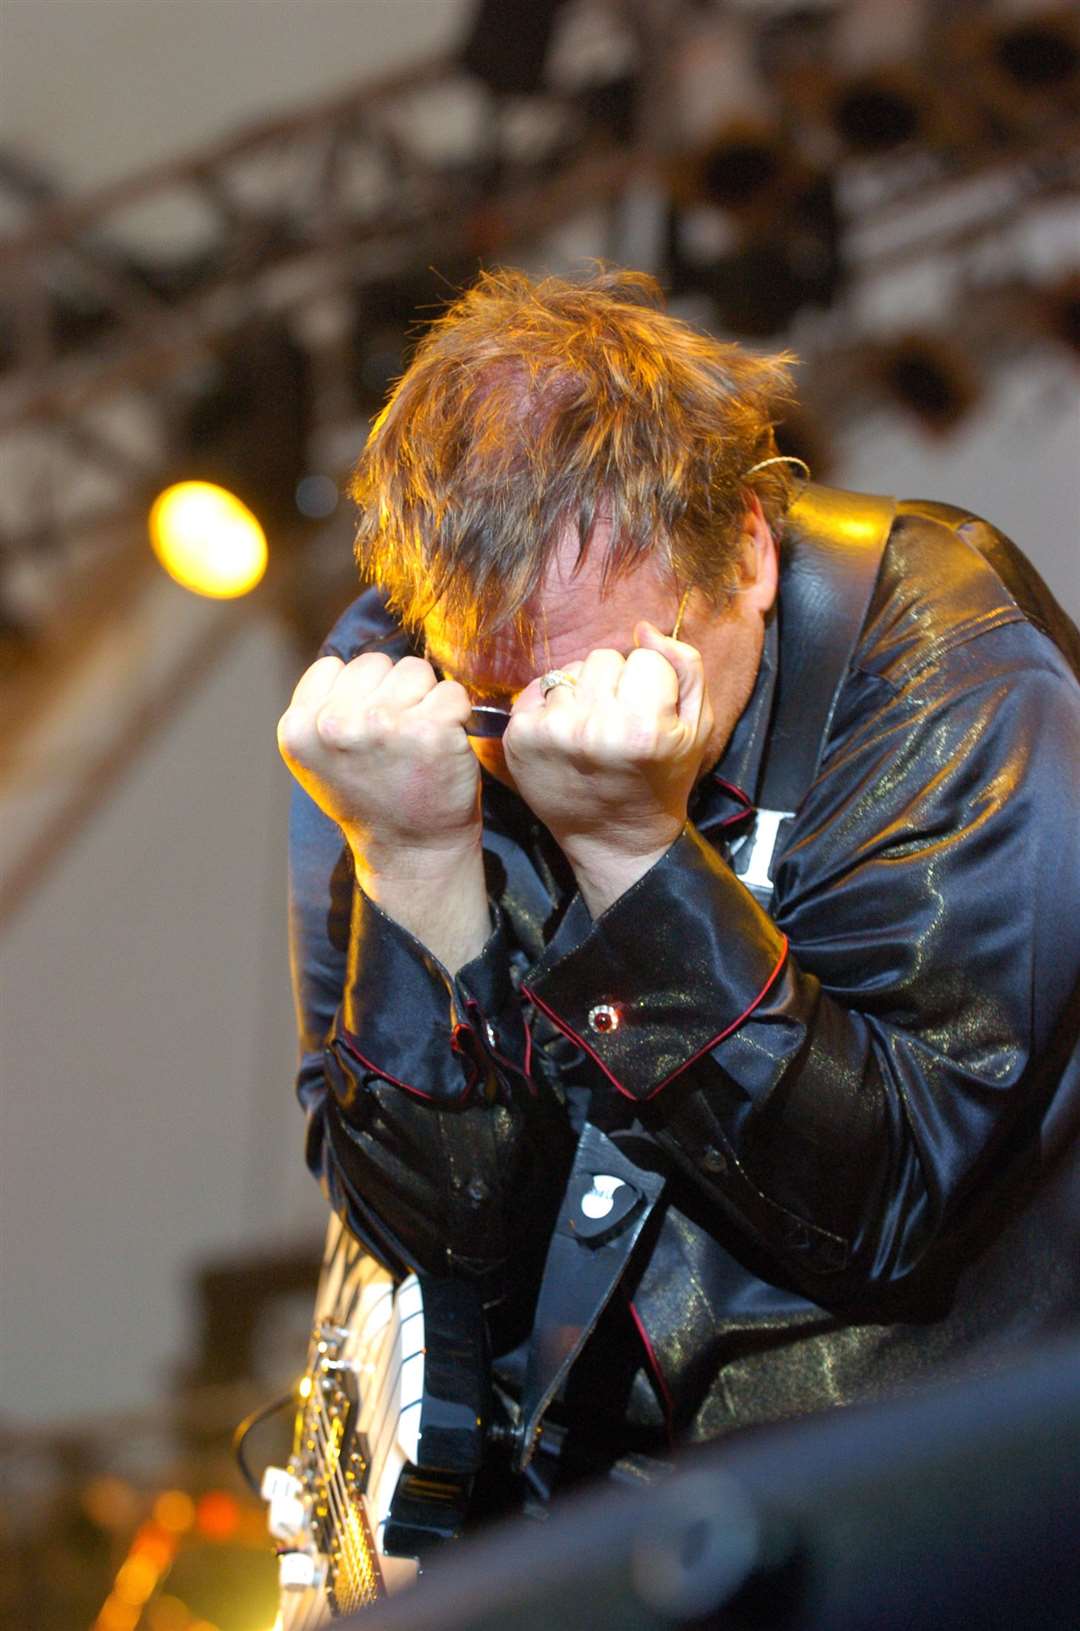 Flamboyant rockstar Meat Loaf performed in front of thousands at Leeds Castle in 2005